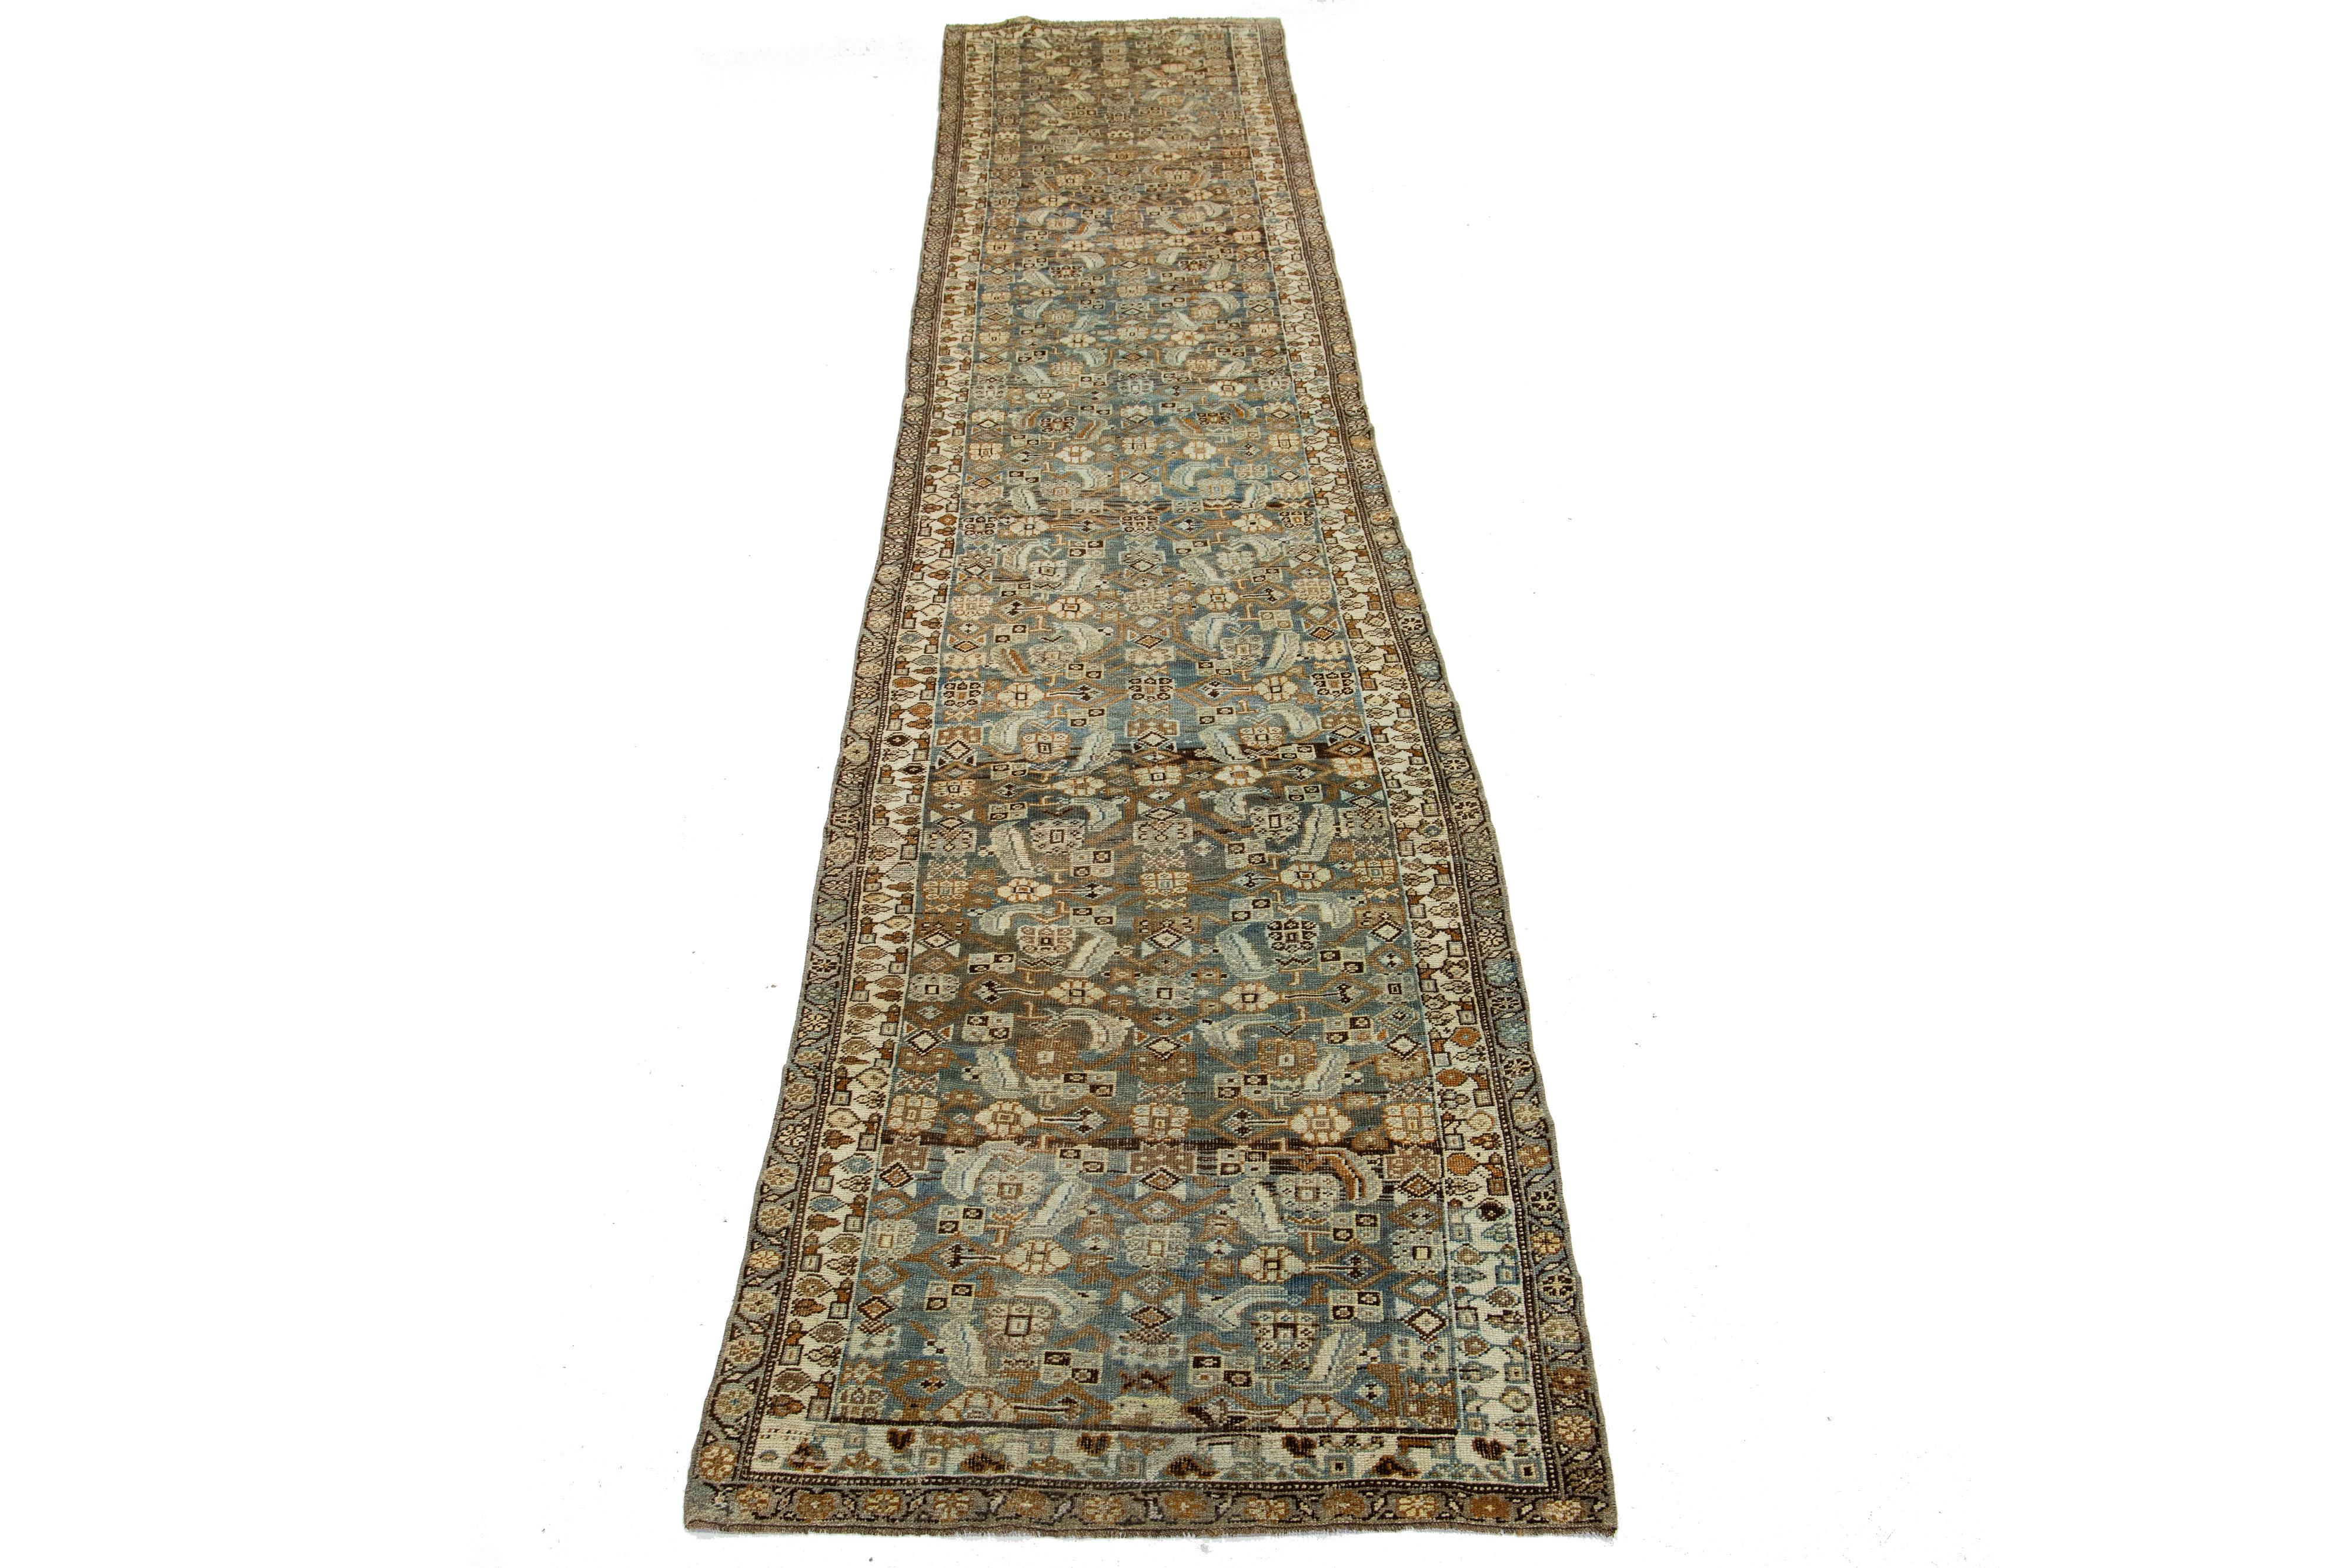 Beautiful antique Bidjar hand-knotted wool runner with a blue color field. This Bidjar rug has a designed frame with beige, orange, and brown accents in a gorgeous all-over design.

This rug measures 3'4